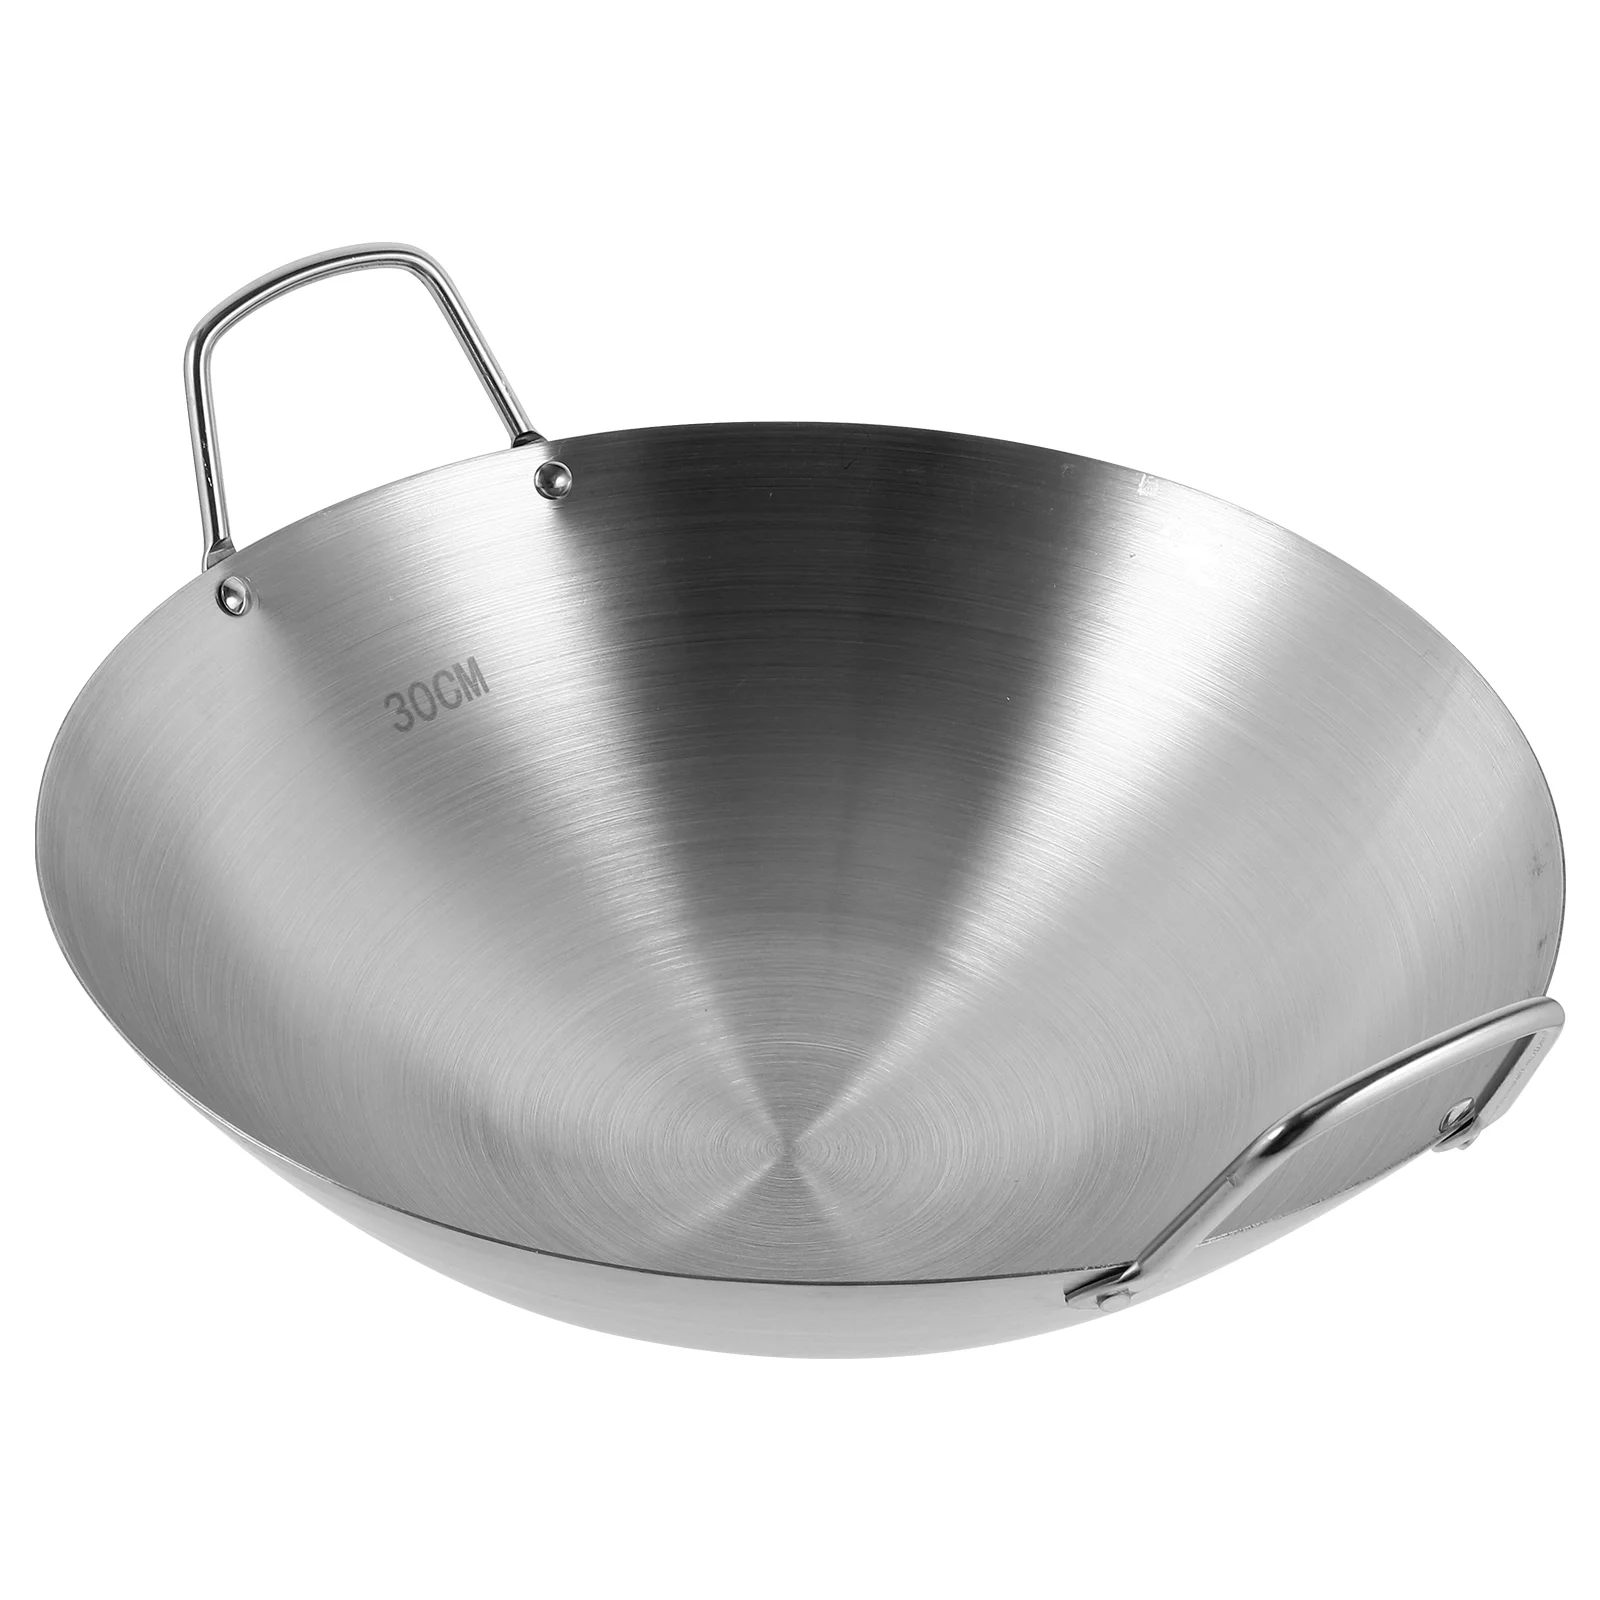 

Stainless Steel Wok Griddle Kitchen Non-stick Pot Multi-functional Camping Supply Gadget Frying with Handle Two Household